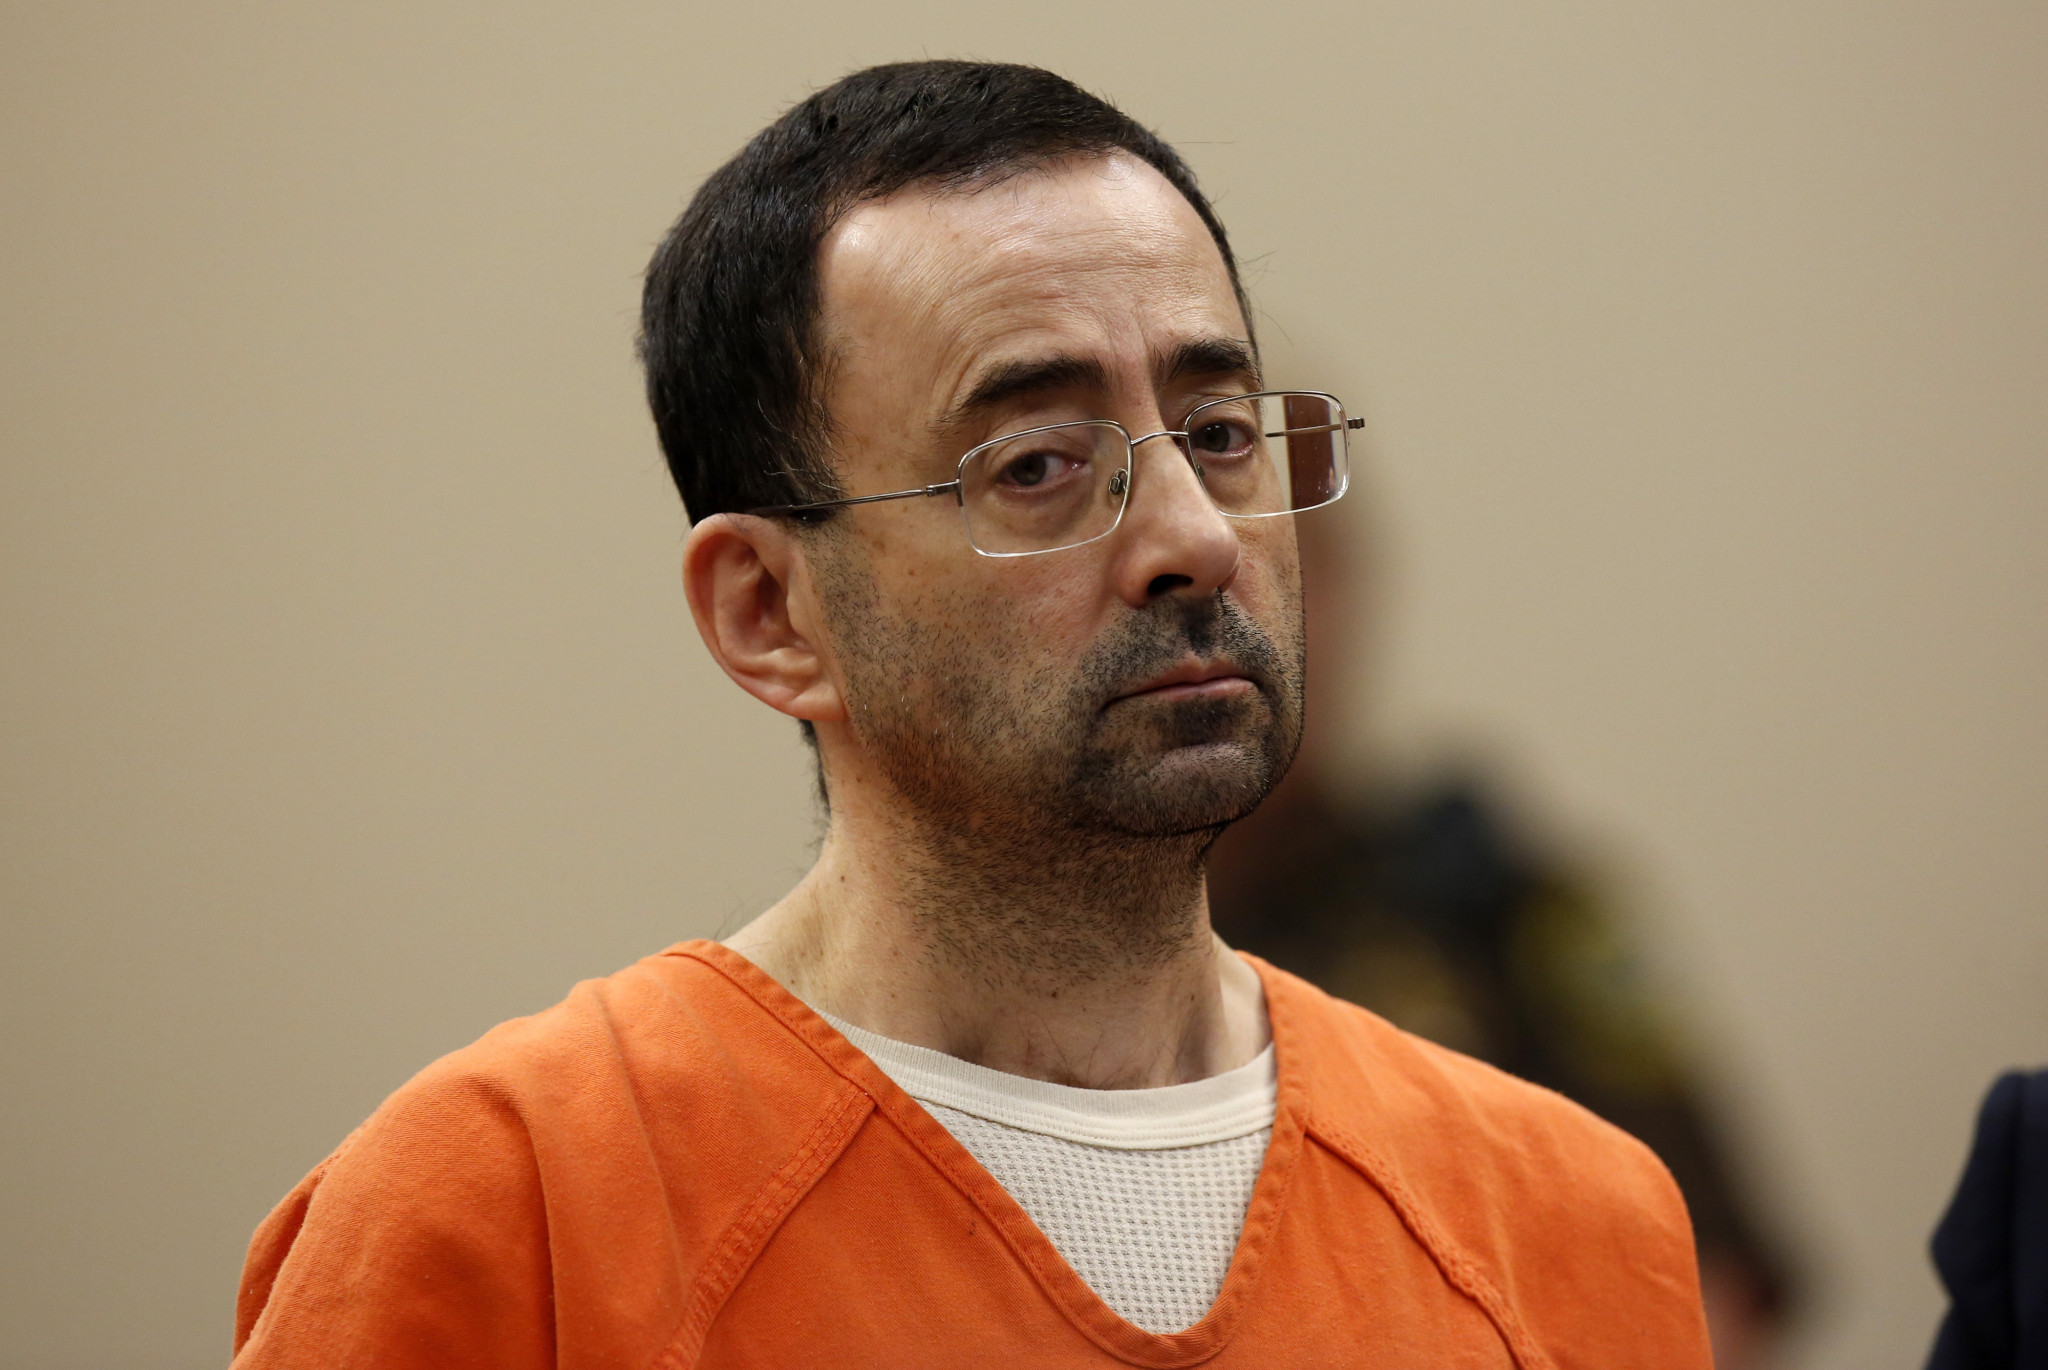 The scandal surrounding Larry Nassar has created growing pressure for change at USA Gymnastics ©Getty Images